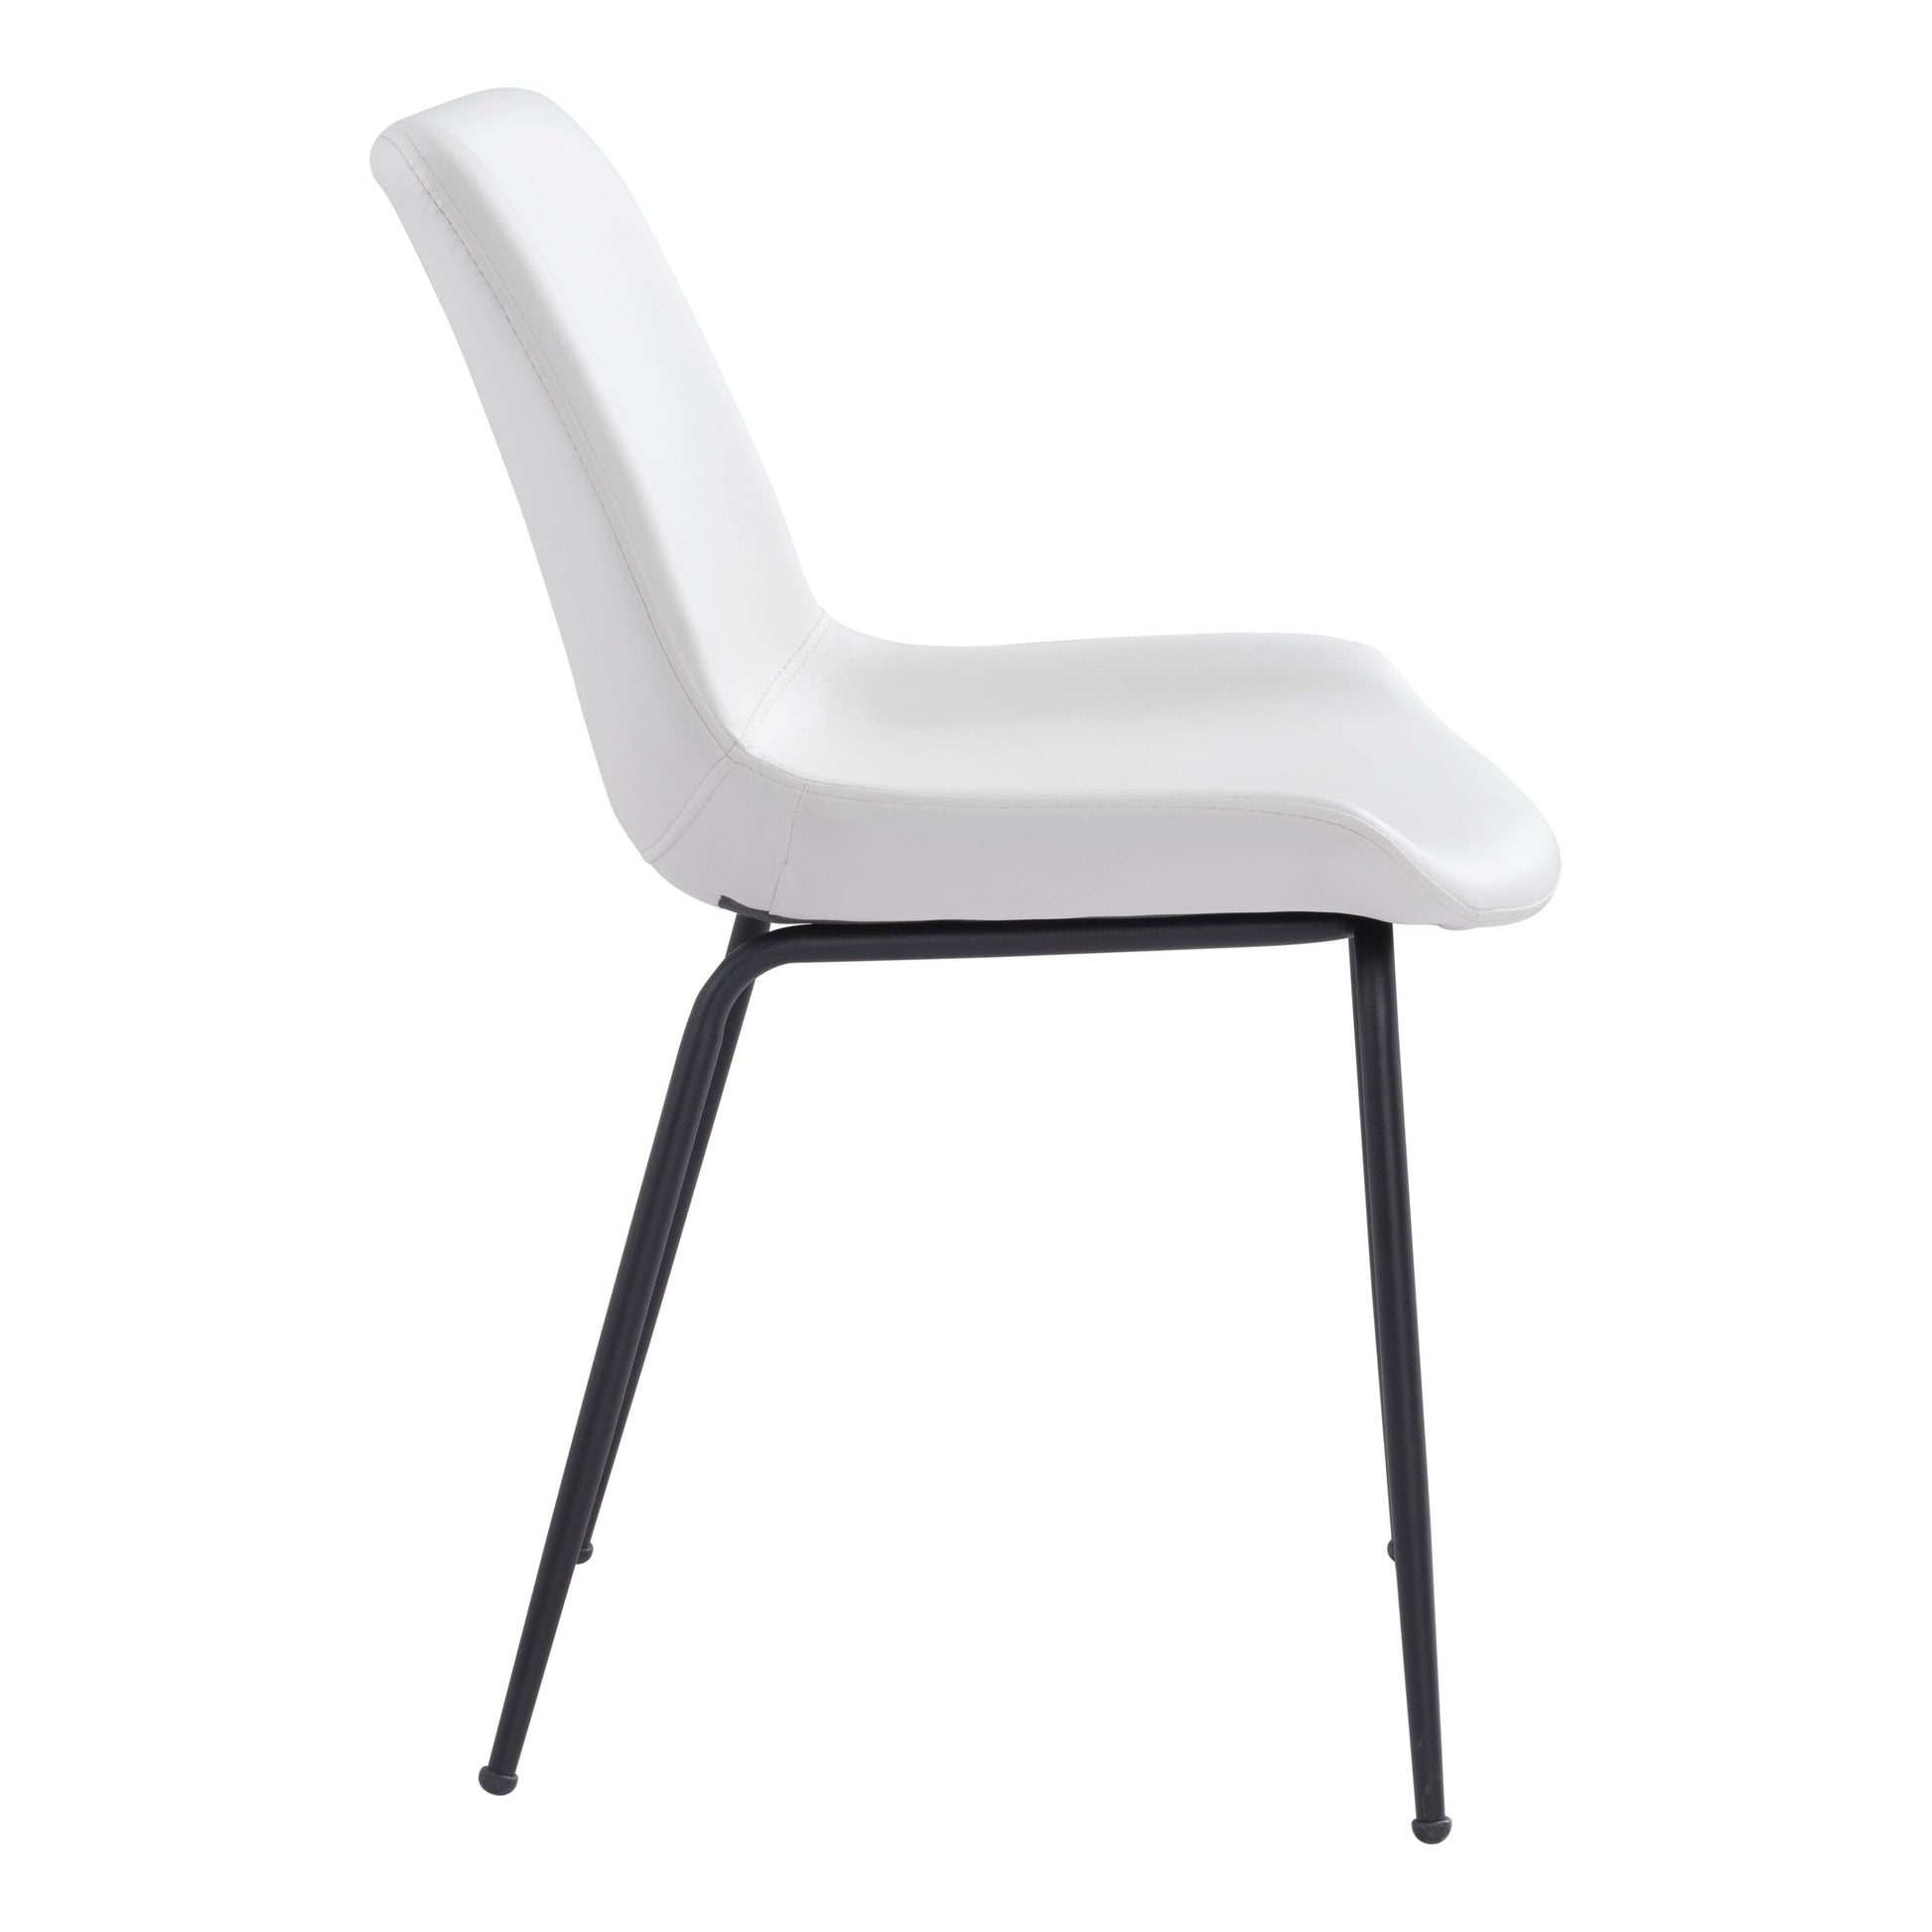 Byron Dining Chair (Set of 2) White - Sideboards and Things Accents_Black, Back Type_Full Back, Back Type_With Back, Brand_Zuo Modern, Color_Black, Color_White, Depth_20-30, Height_30-40, Materials_Metal, Materials_Upholstery, Metal Type_Steel, Number of Pieces_2PC Set, Product Type_Dining Height, Seat Material_Upholstery, Shape_Armless, Upholstery Type_Leather, Upholstery Type_Vegan Leather, Width_10-20